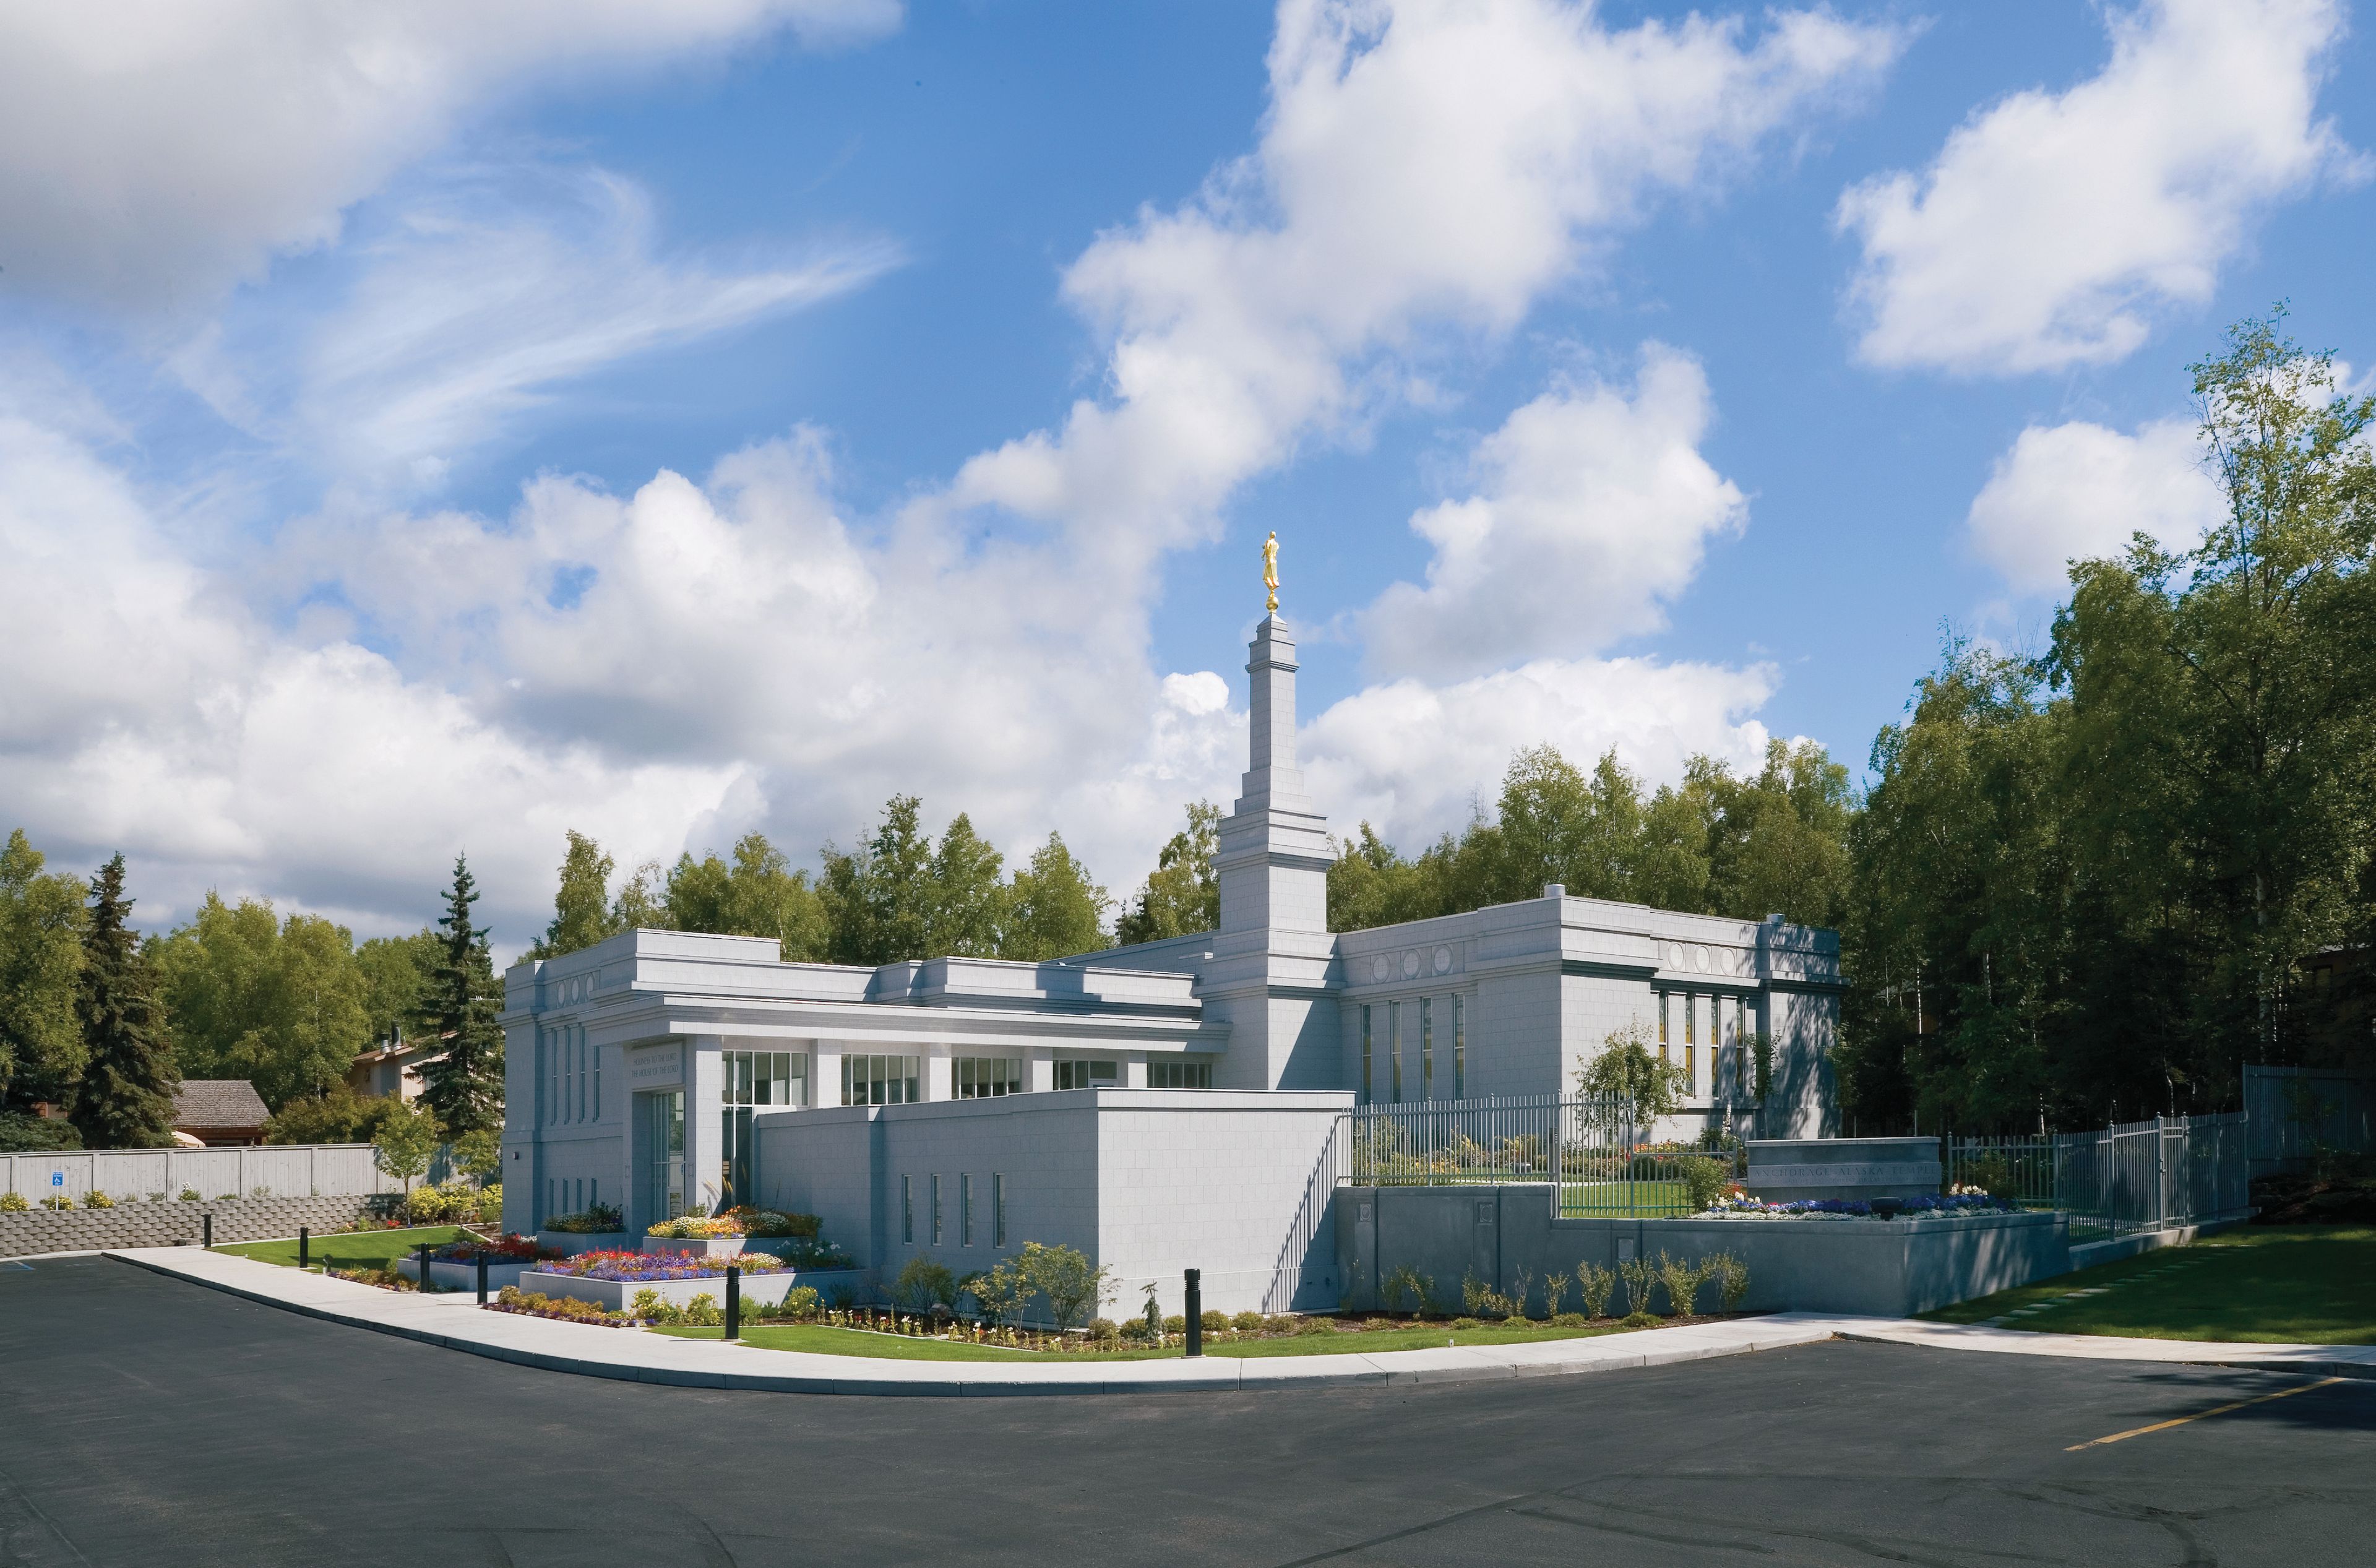 A view of the Anchorage Alaska Temple and grounds during the day.